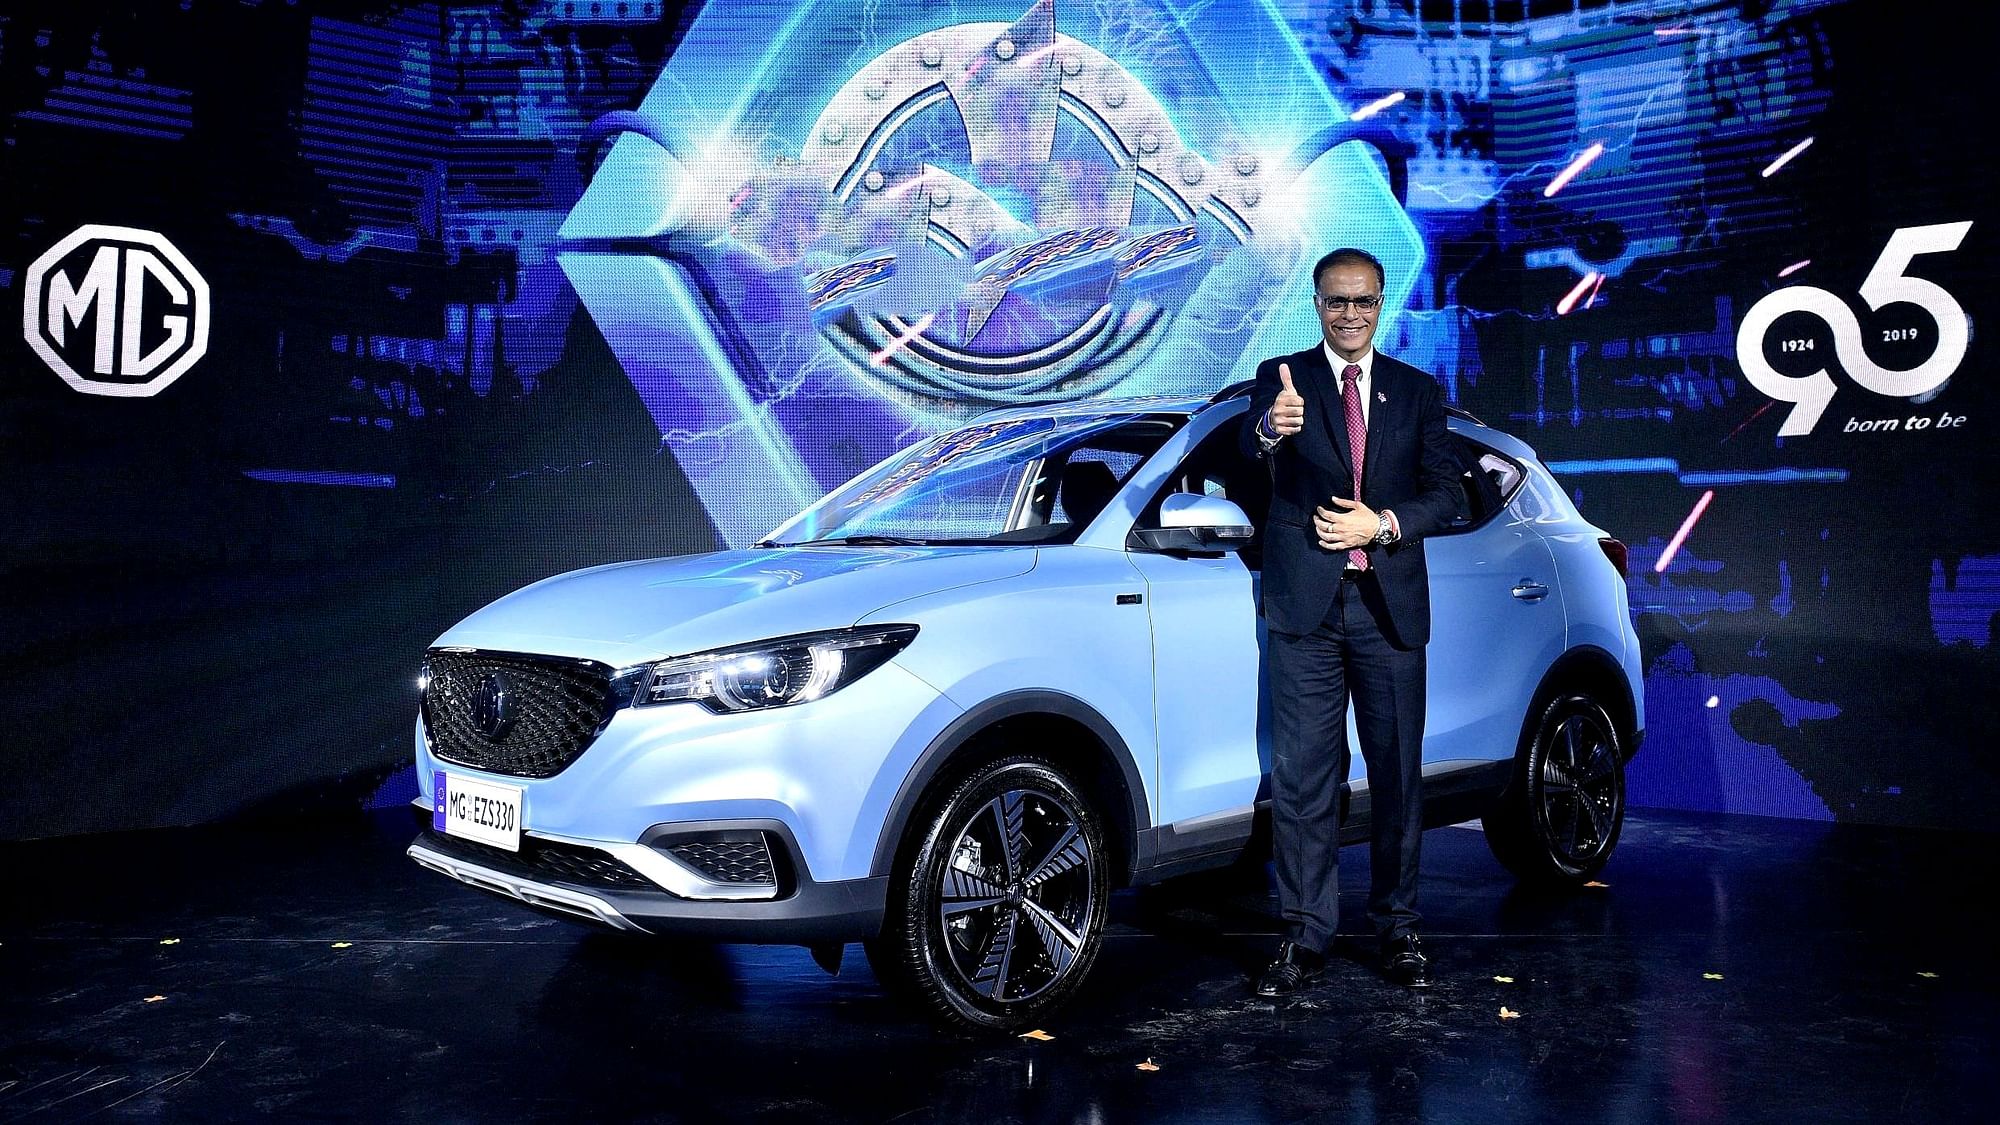 MG Motor will launch the eZS electric SUV by December 2019.